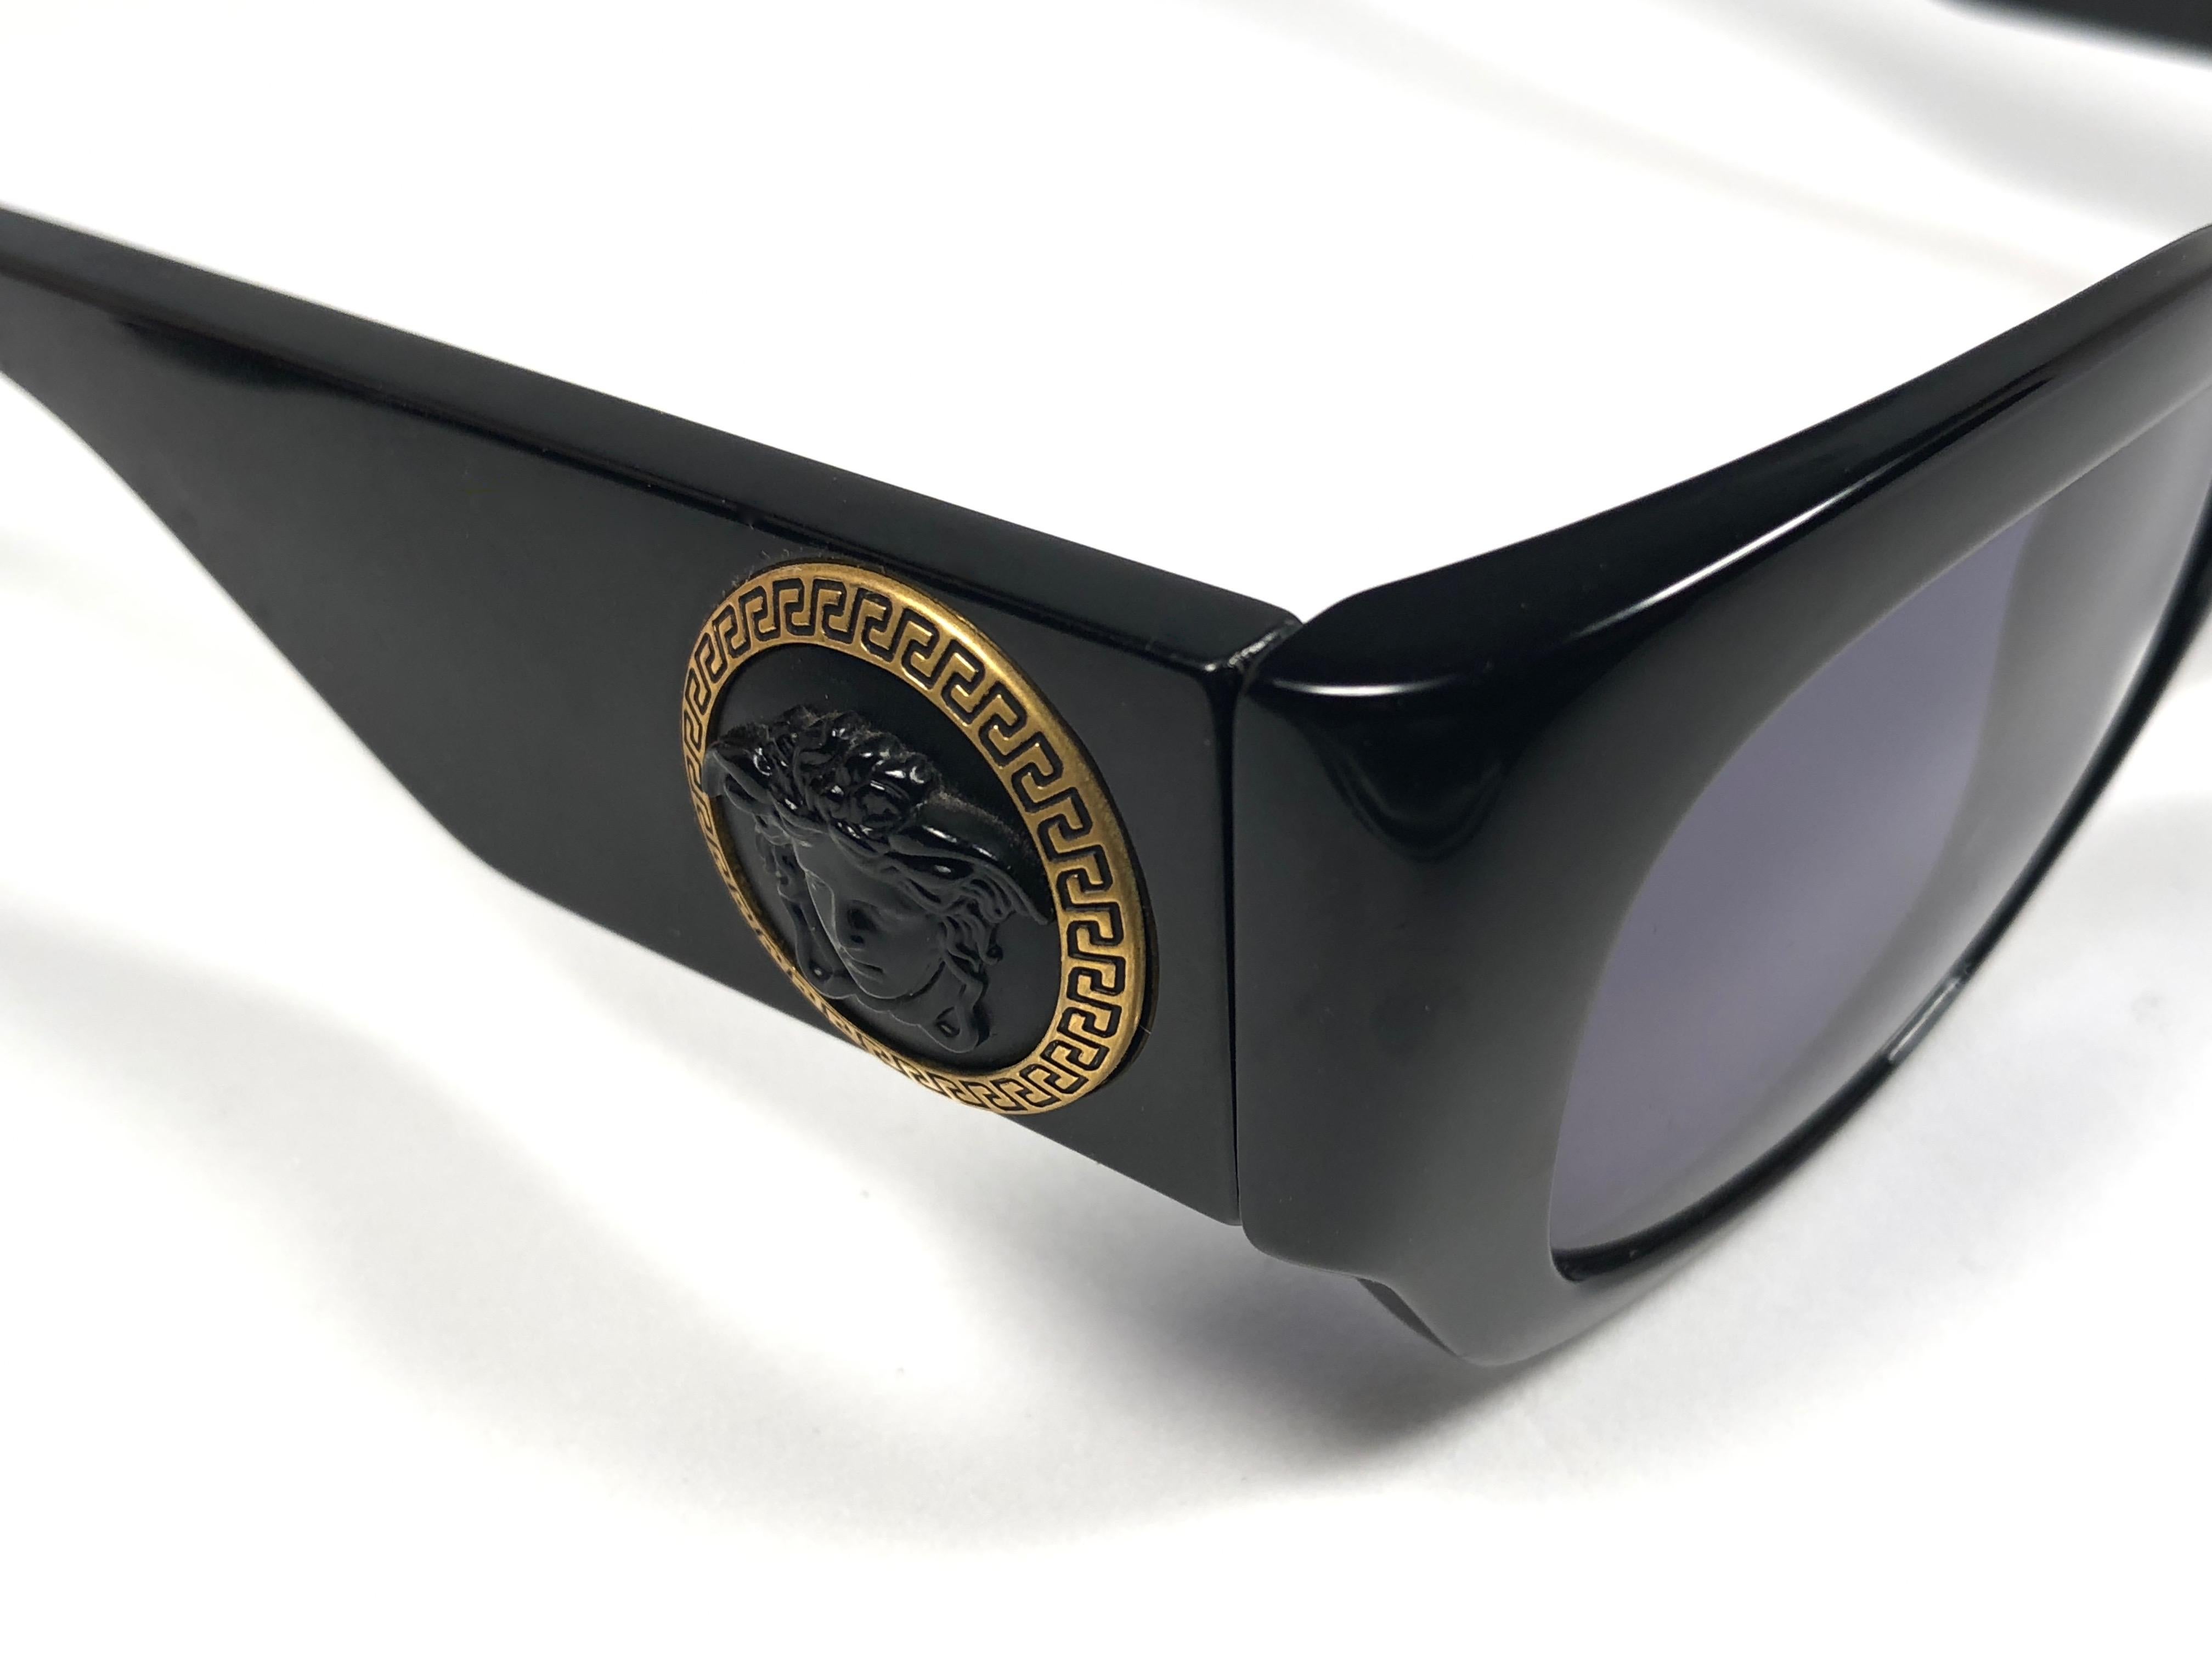 New Vintage Gianni Versace 420 E Sleek Black Sunglasses 1990's Made in Italy 2